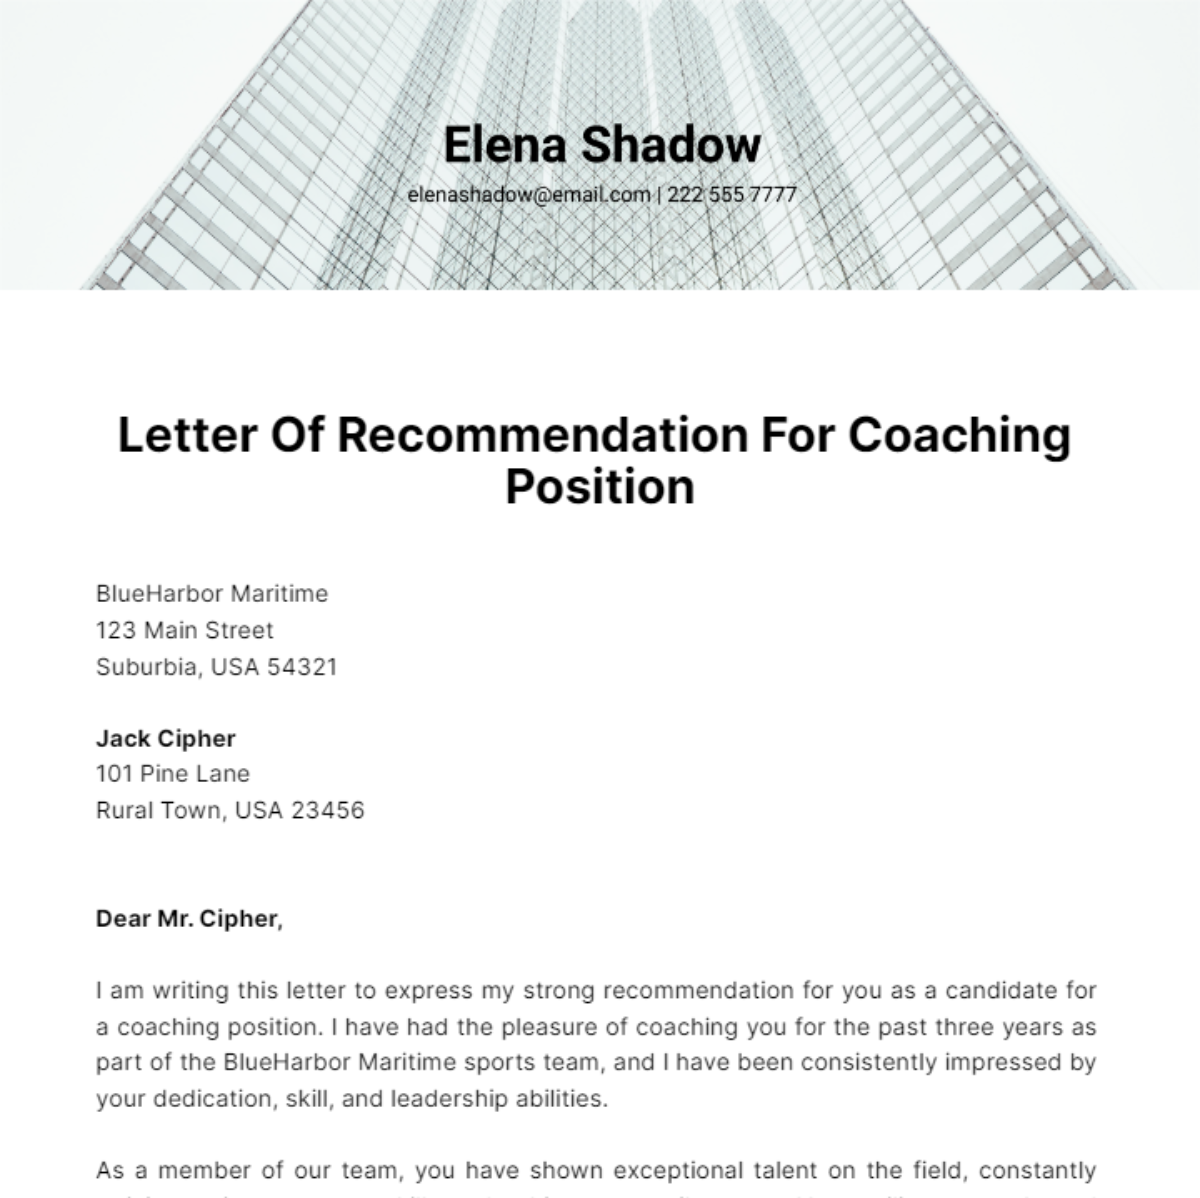 Letter Of Recommendation For Coaching Position Template